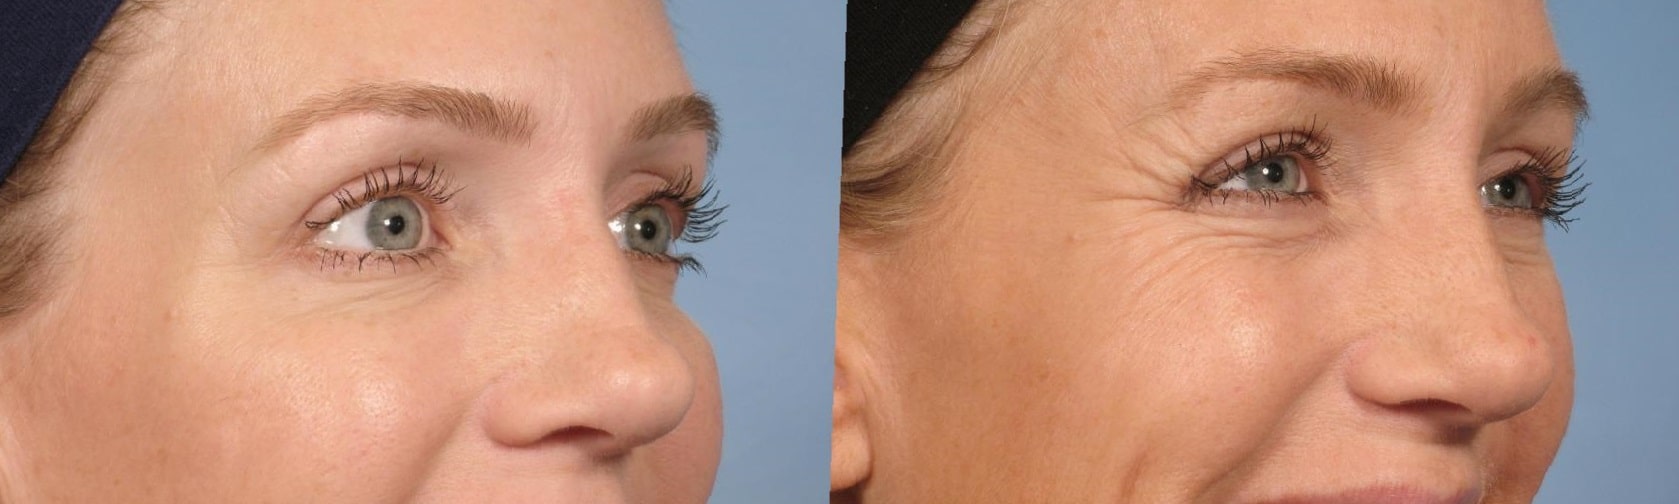 botox-before-and-after-crows-feet-30